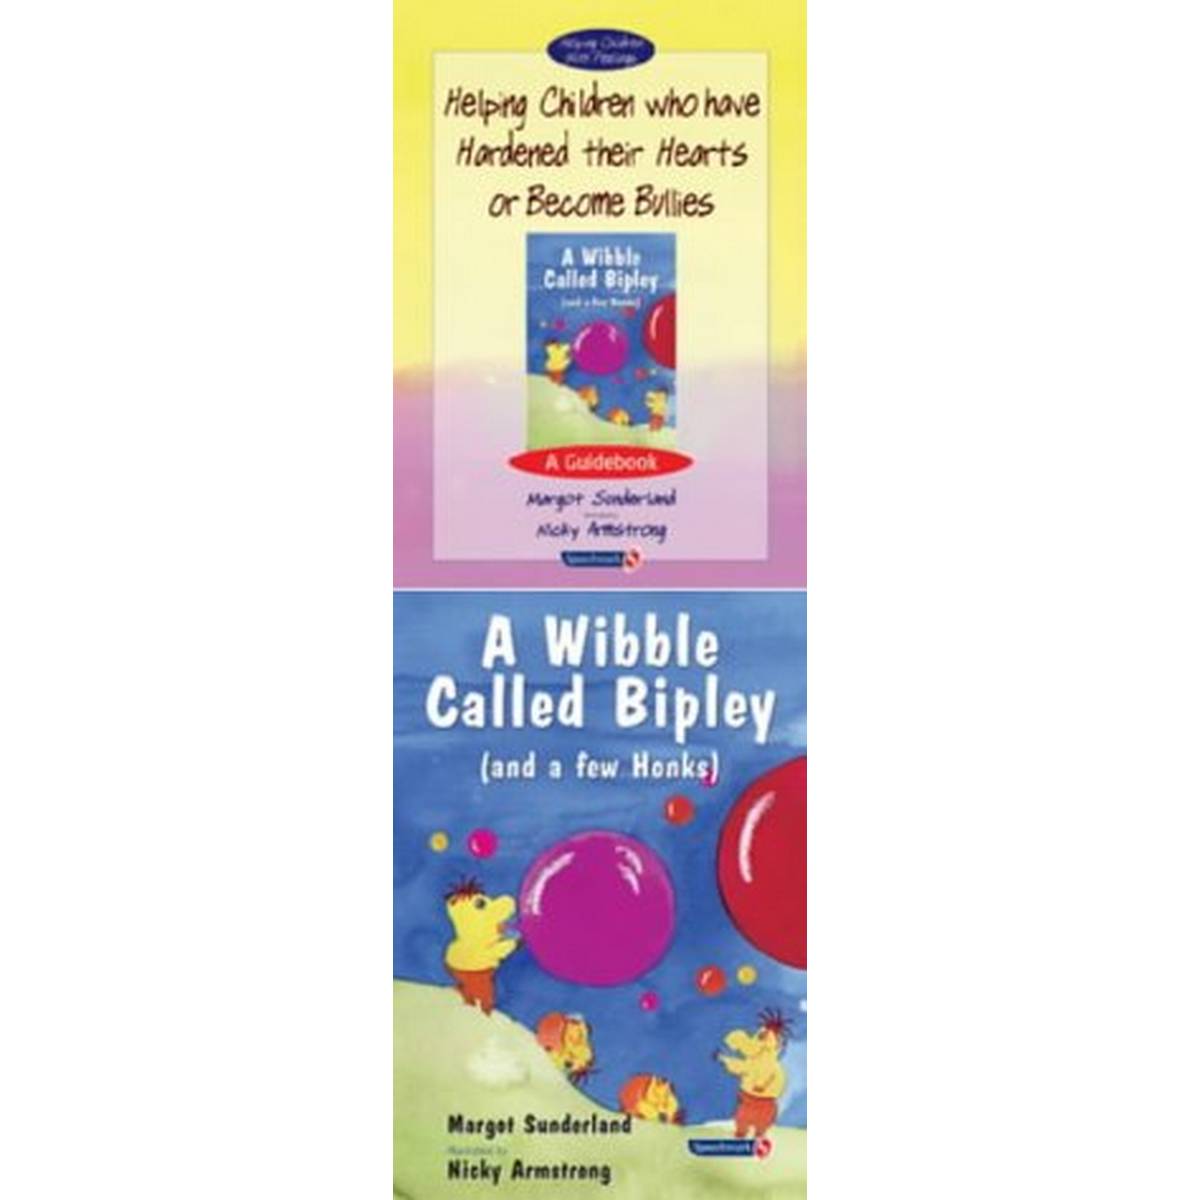 Helping Children who have Hardened their Hearts or Become Bullies & A Wibble Called Bipley